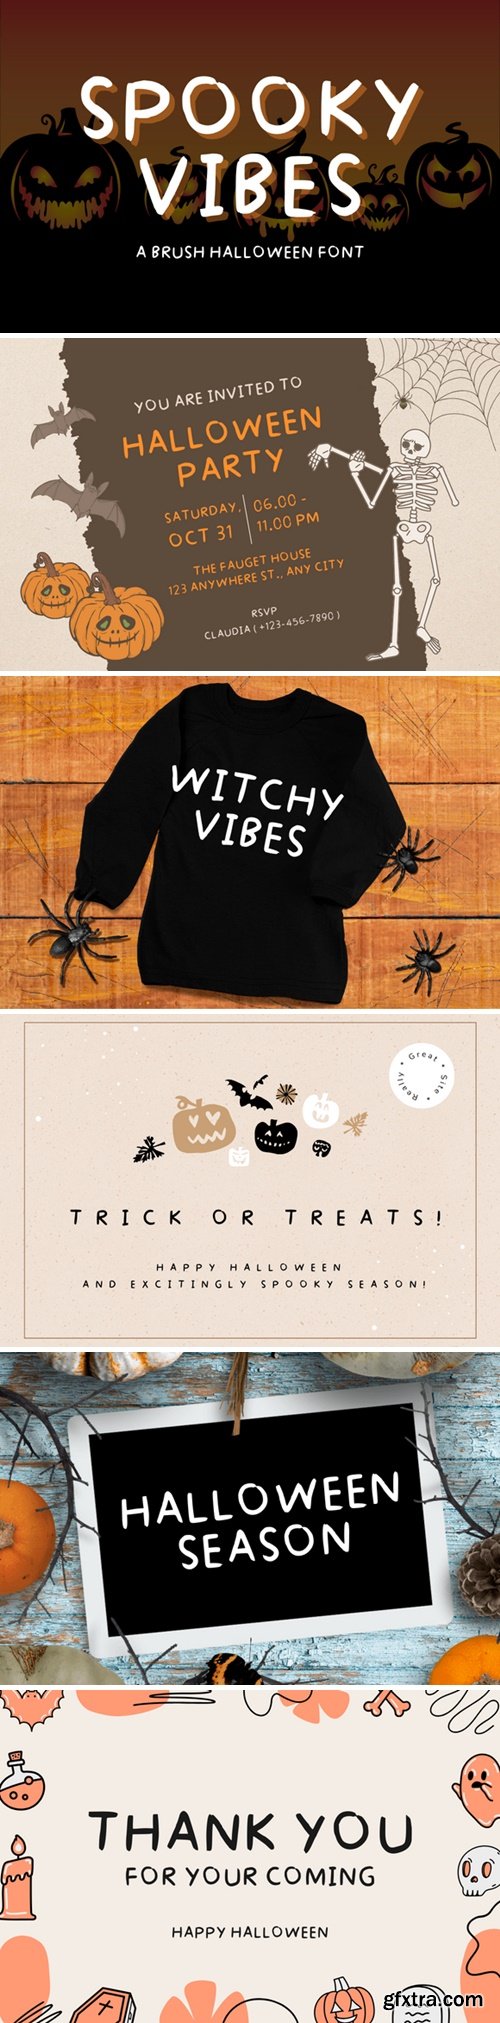 Spooky Vibes Font